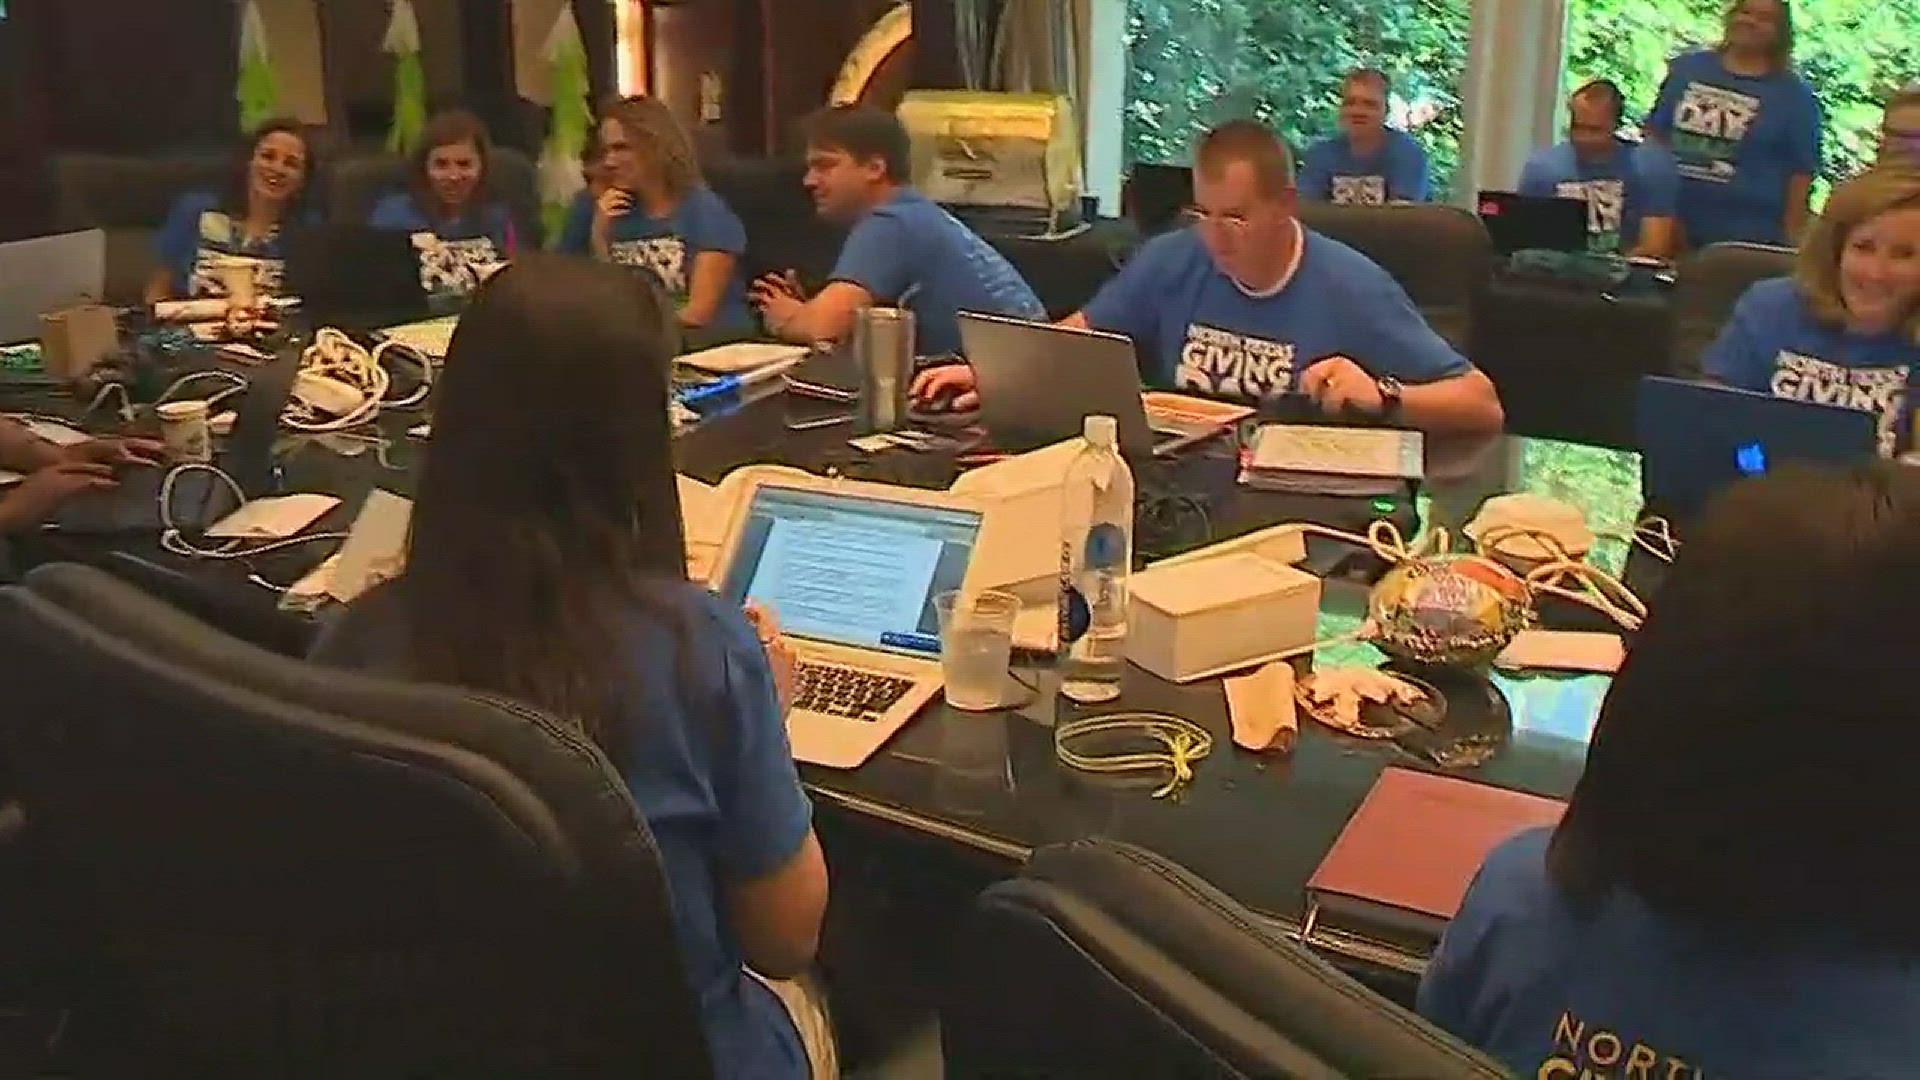 Inside the North Texas Giving Day 'war room'